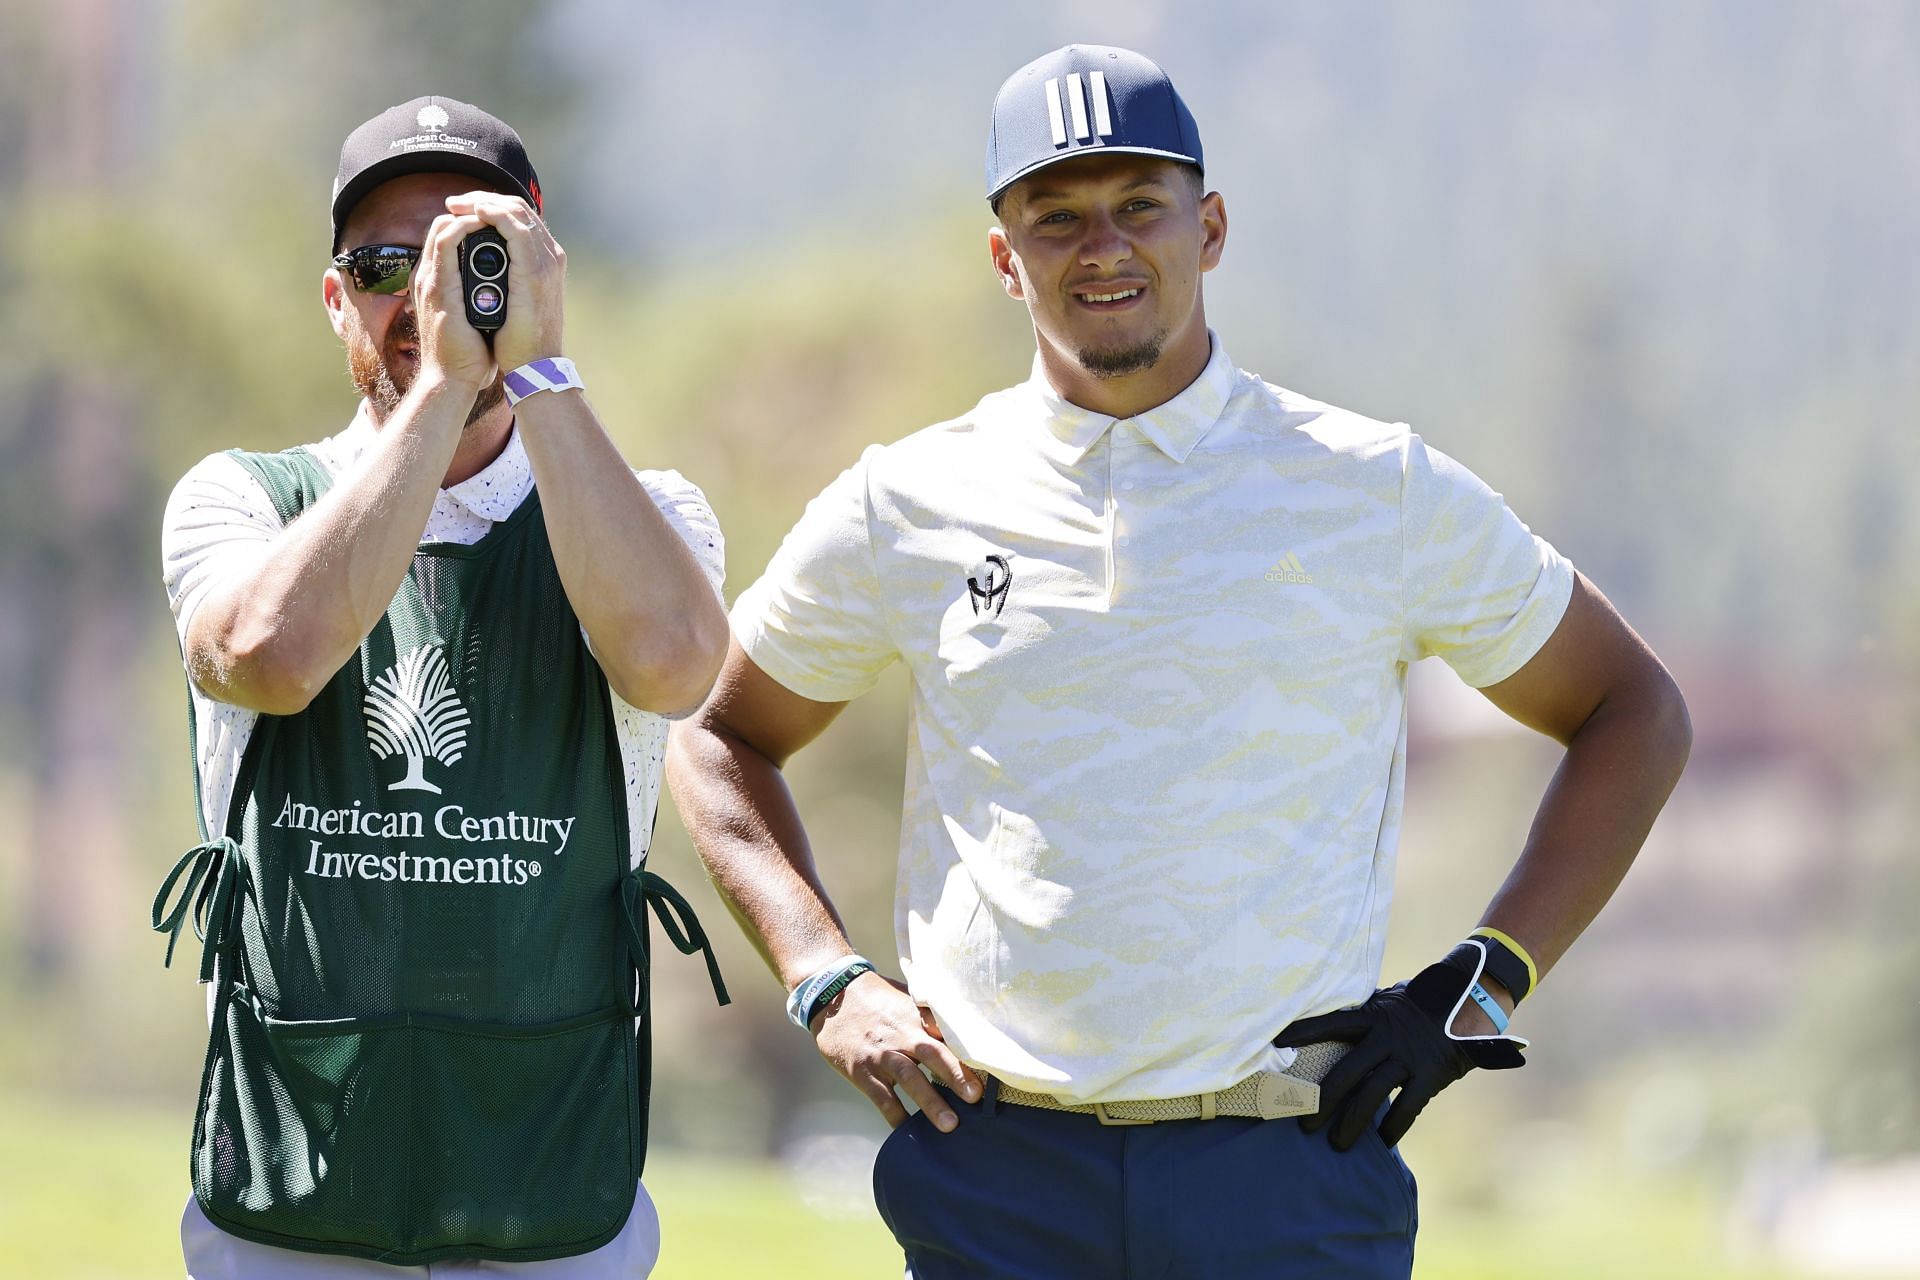 Patrick Mahomes at the 2022 American Century Championship - Round One